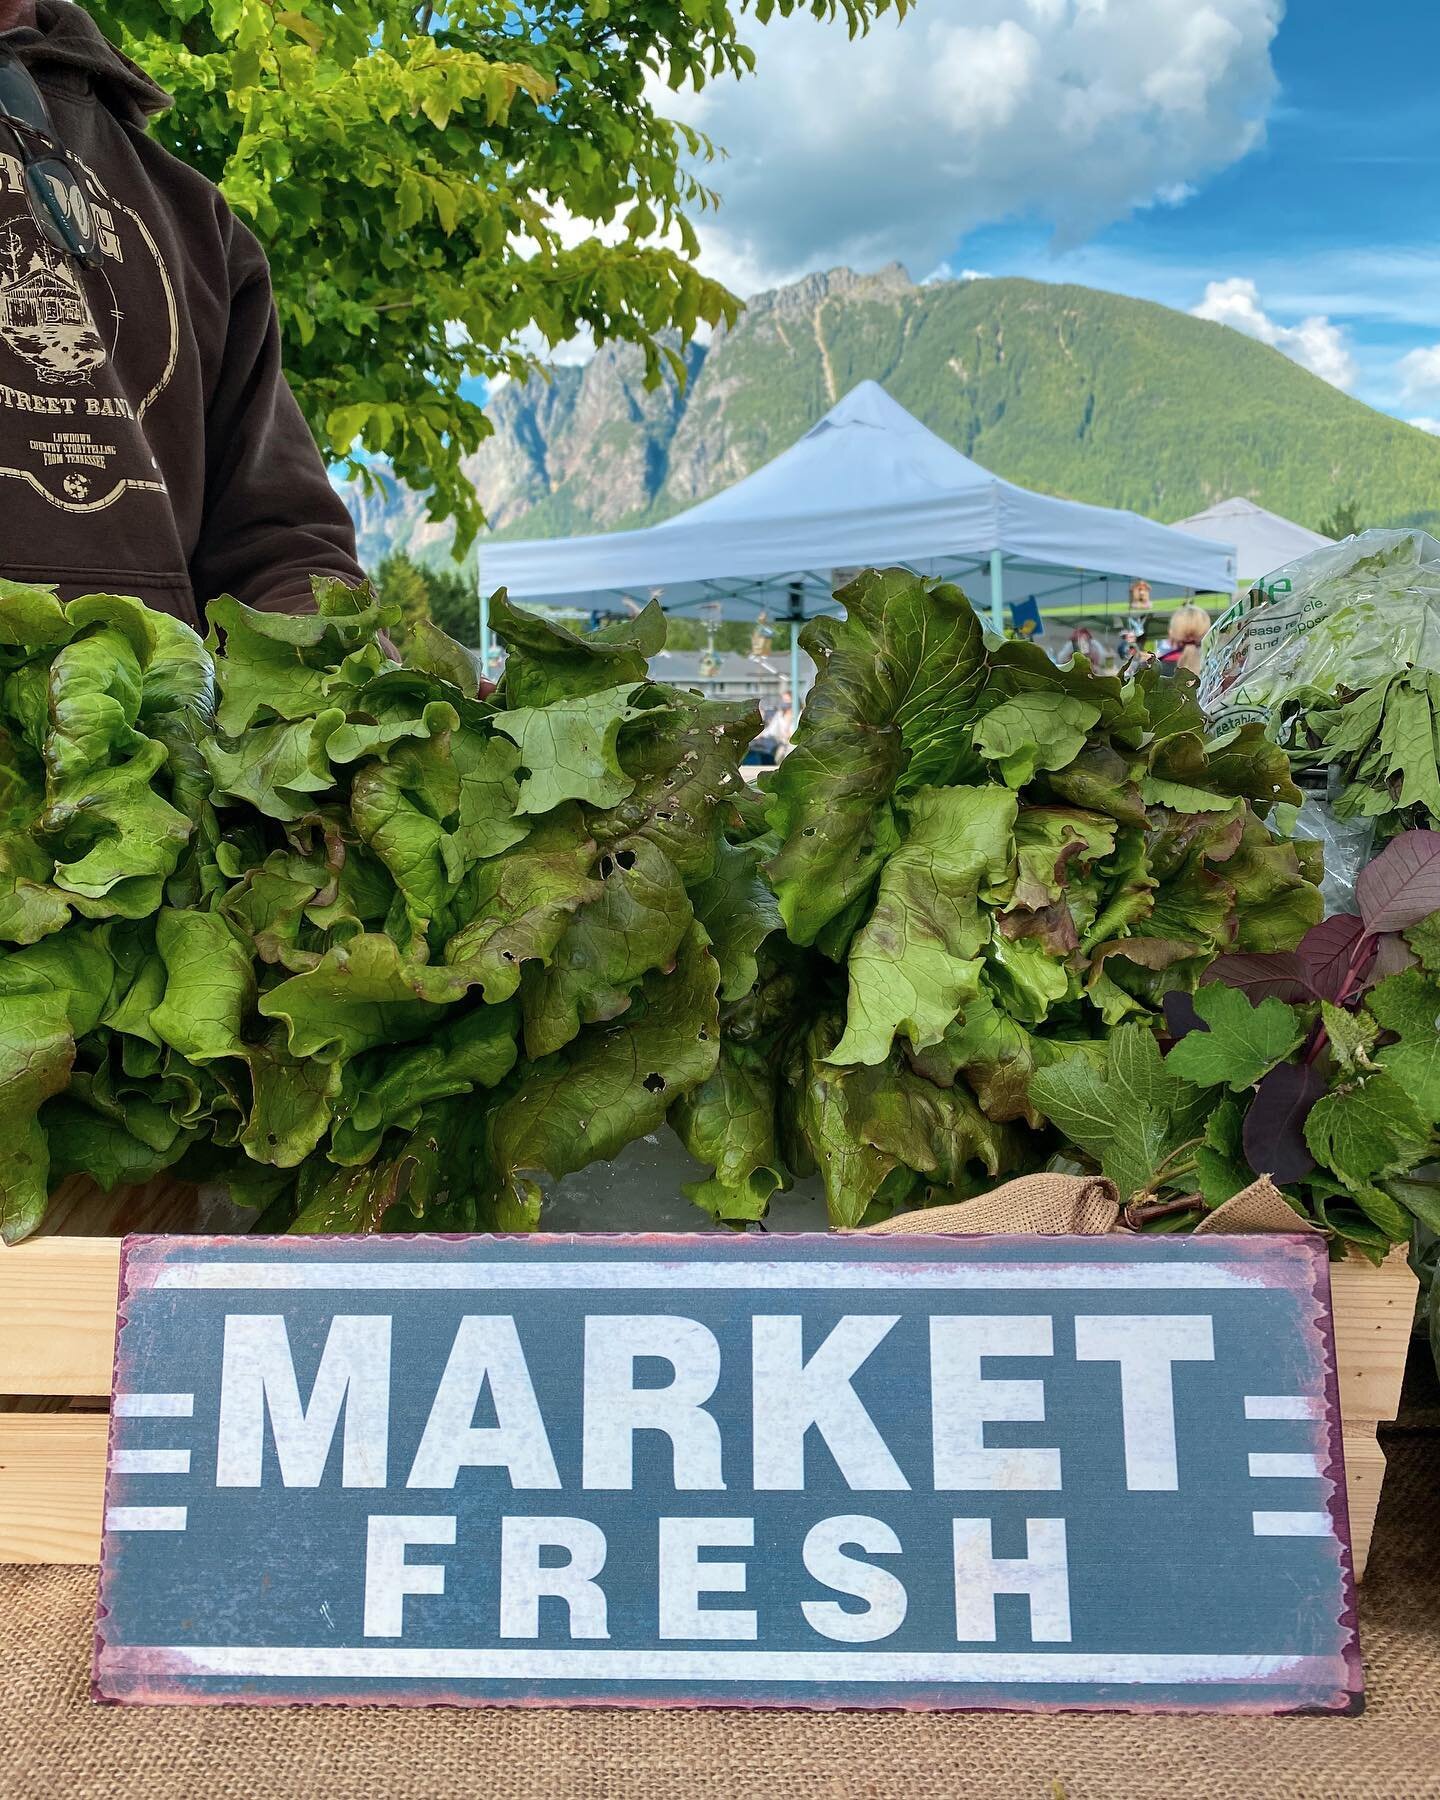 I&rsquo;ll be at the #northbendfarmersmarket @siviewmetroparks today from 4-8p 👨🏻&zwj;🌾 come on by and get some fresh produce! 🥬🧅🍒

-Baby Greens Mix
-Magenta Lettuce, Muir Lettuce, Cherokee Lettuce, Xalbadora (Romaine)
-Beets
-Spinach
-Swiss Ch